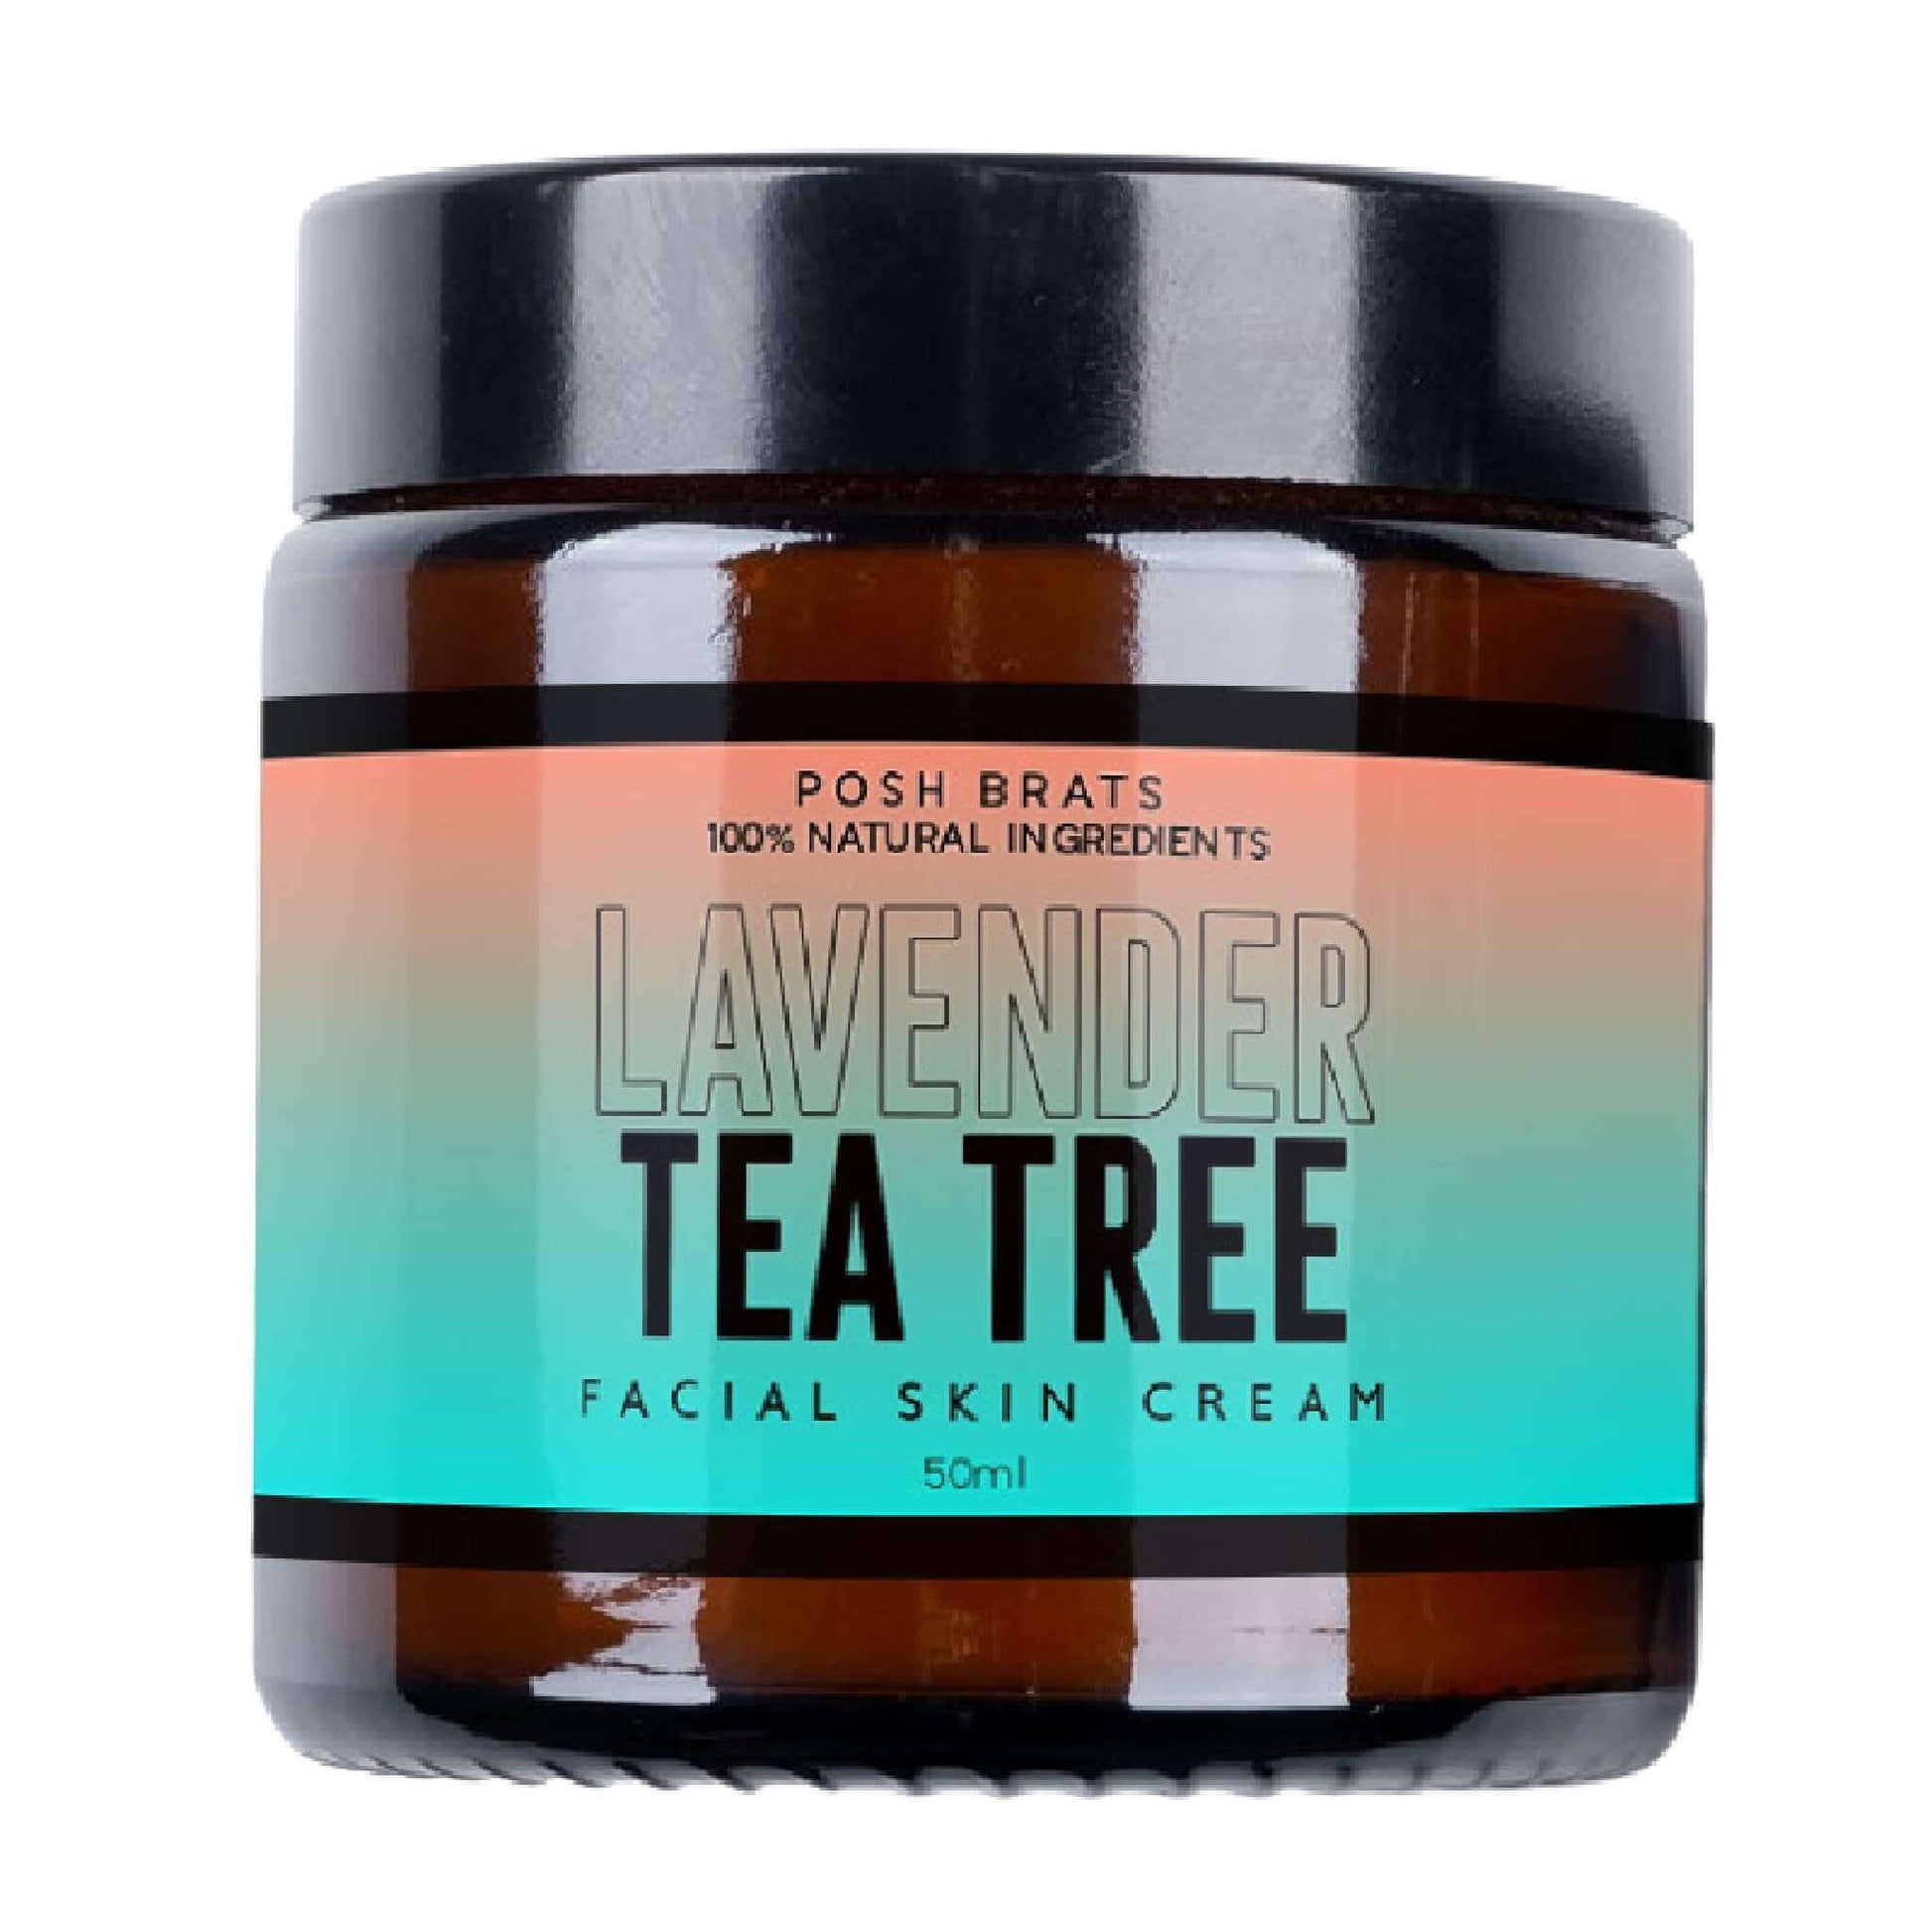 Experience Lavender Tea Tree Clear Skin Aromatherapy Facial Cream for a revitalized glow. Pure, natural, and effective!